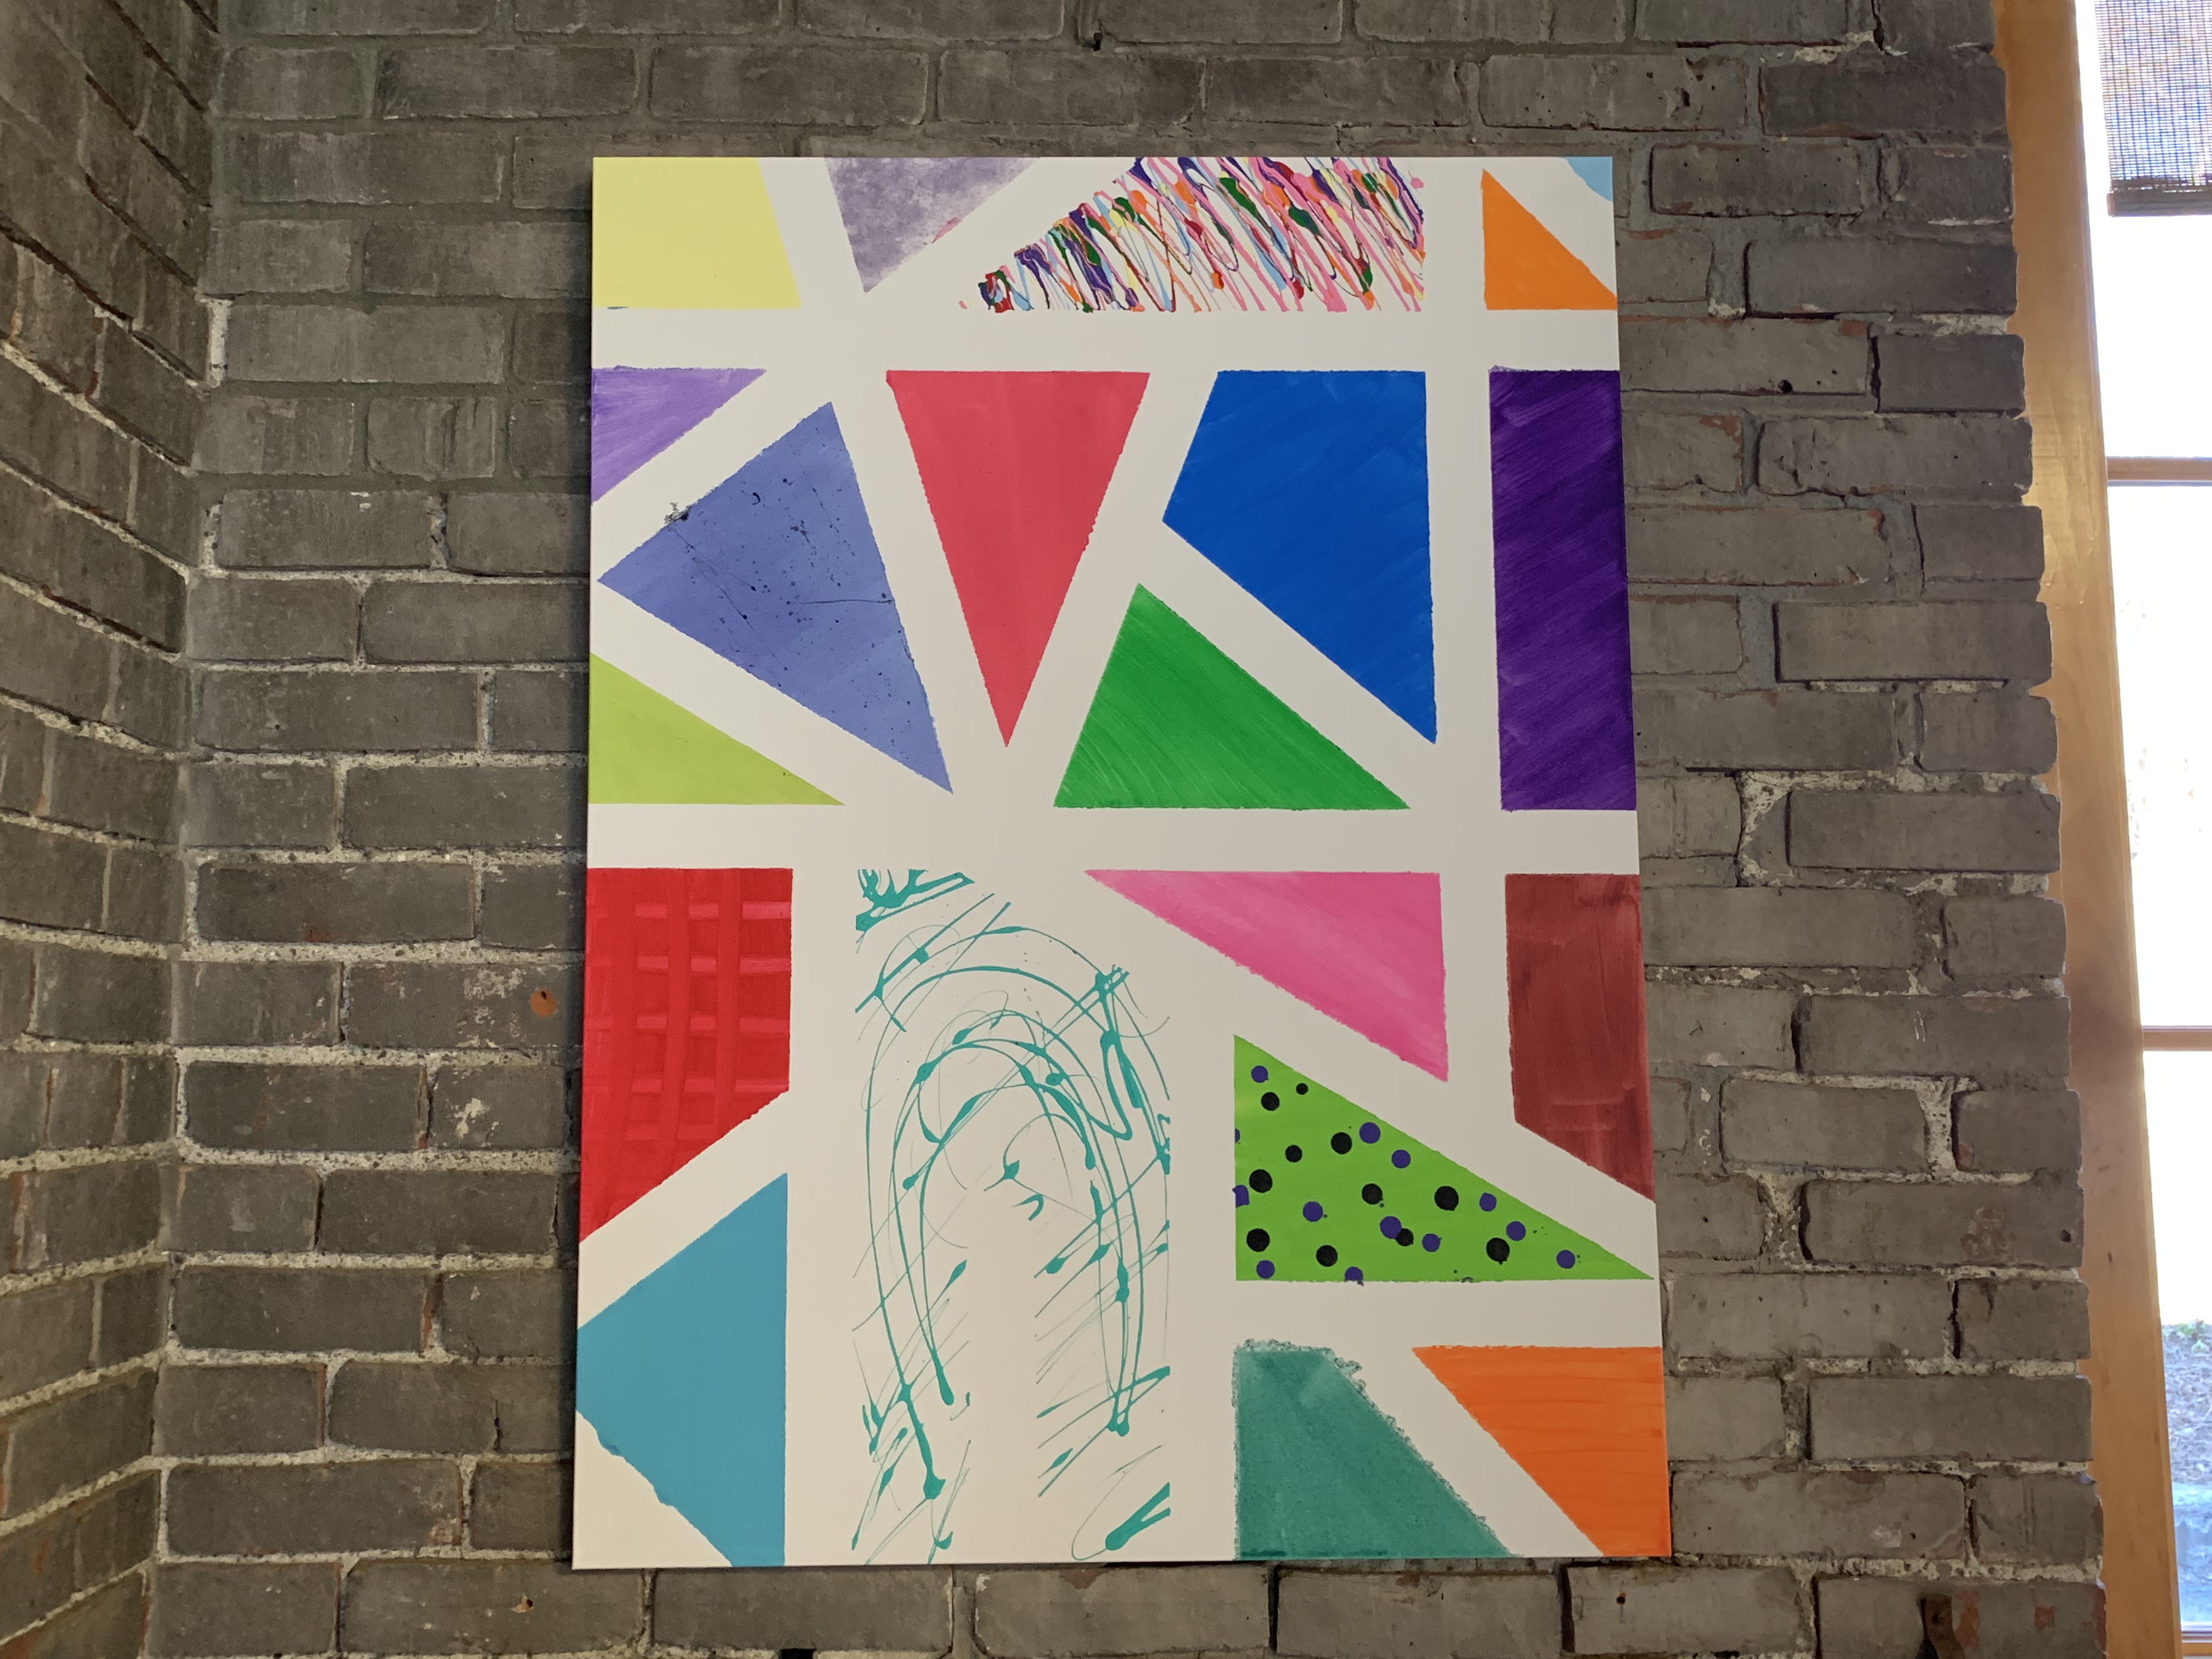 An abstract, colorful painting against a gray brick wall.